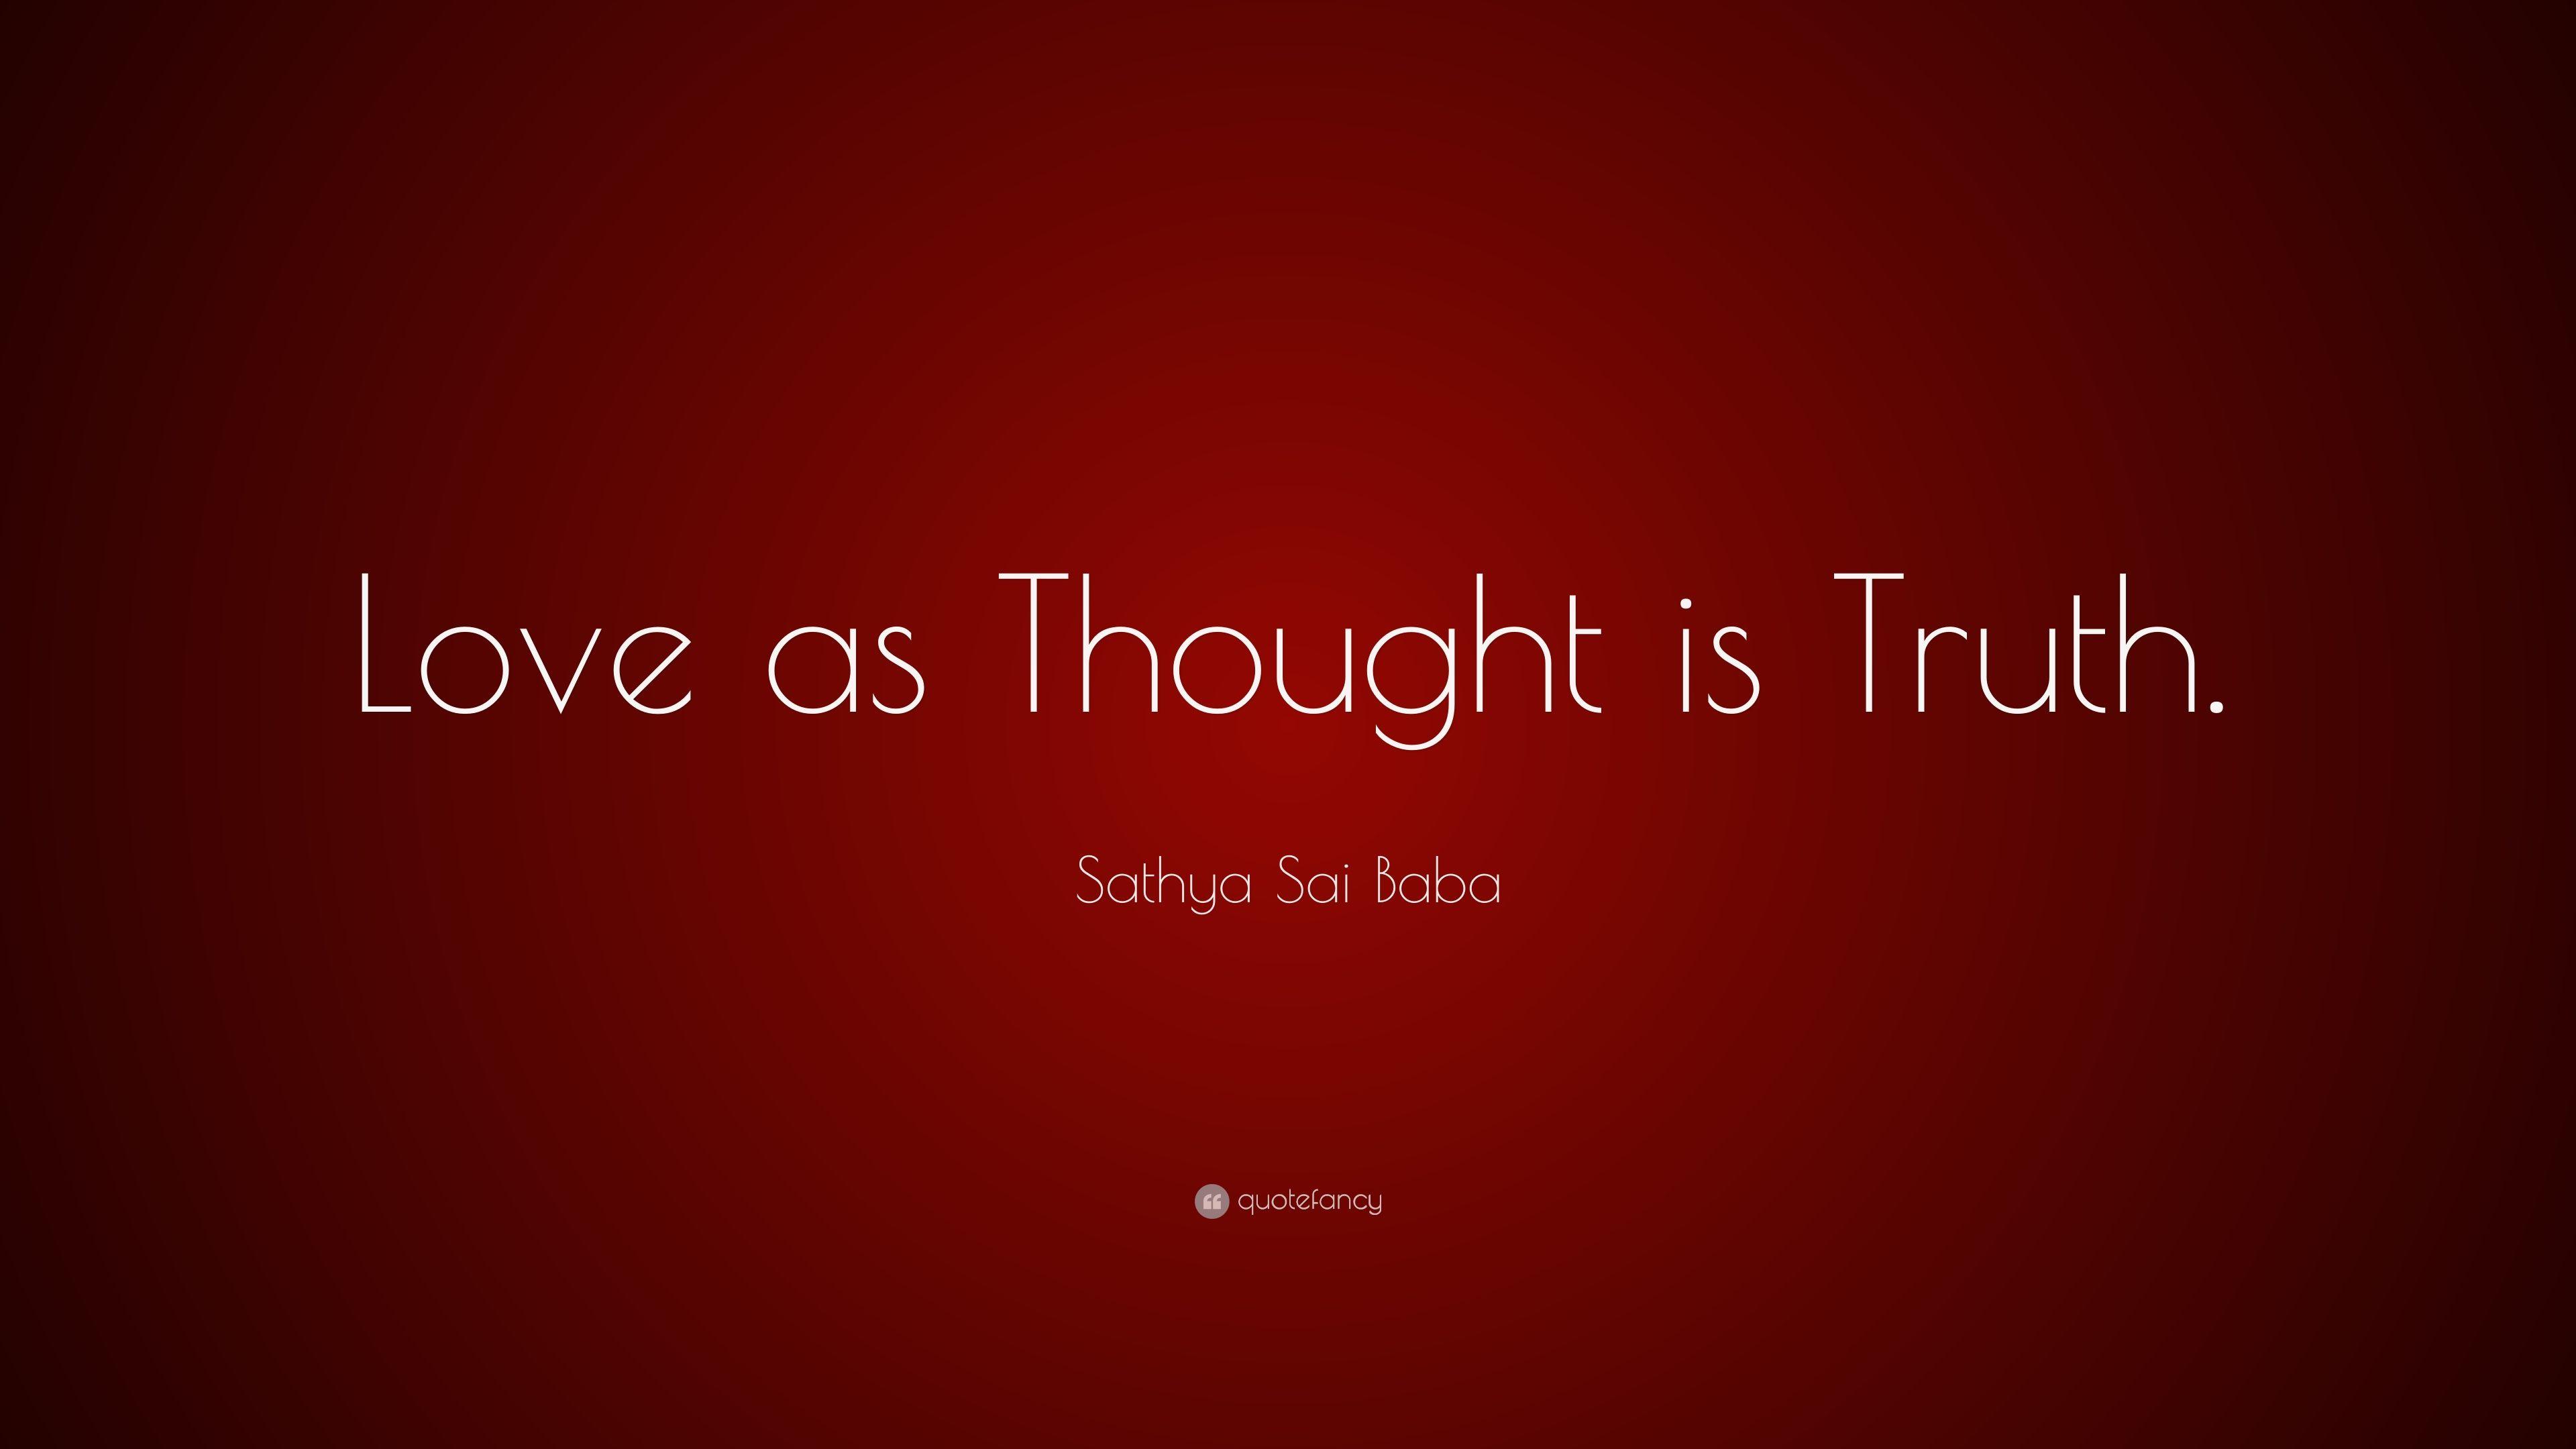 Sathya Sai Baba Quote: “Love as Thought is Truth.” 10 wallpaper